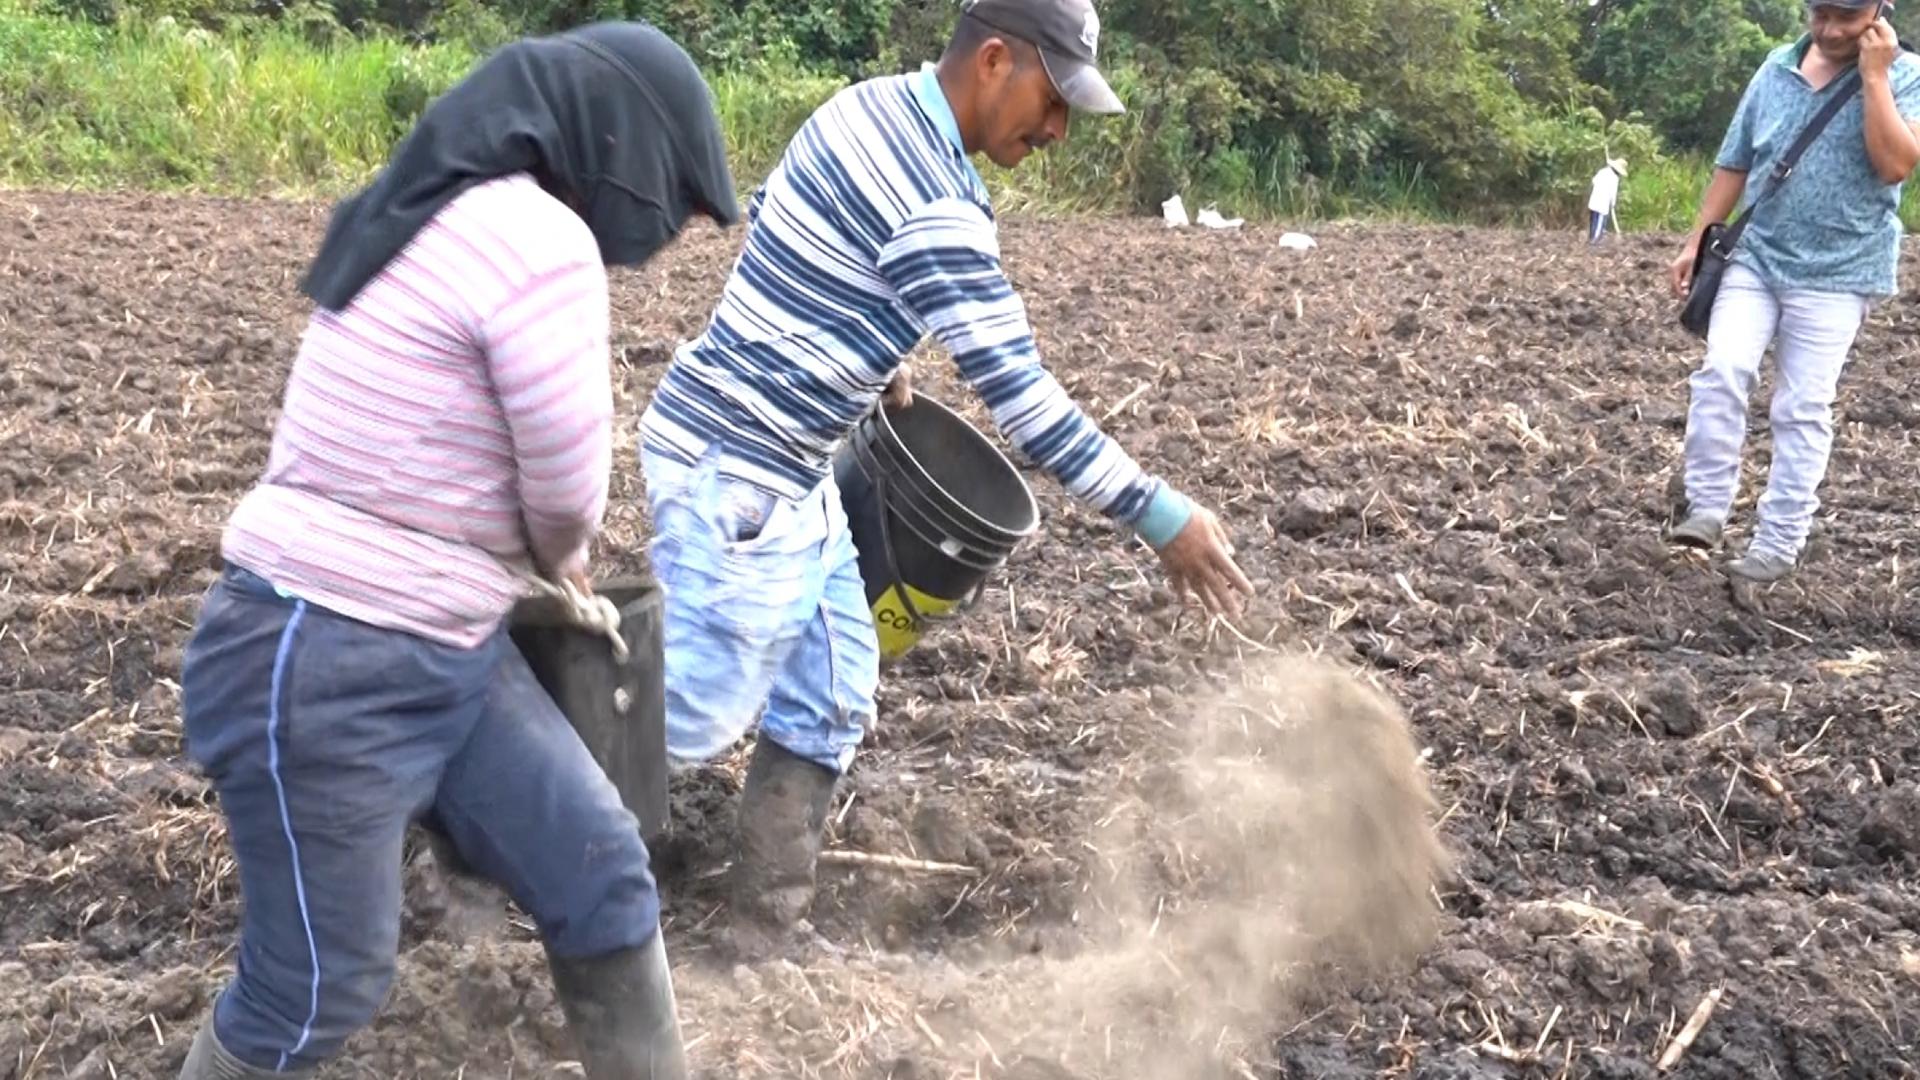 Two people toss fertilizer on the soil as one man takes a call on his mobile phone